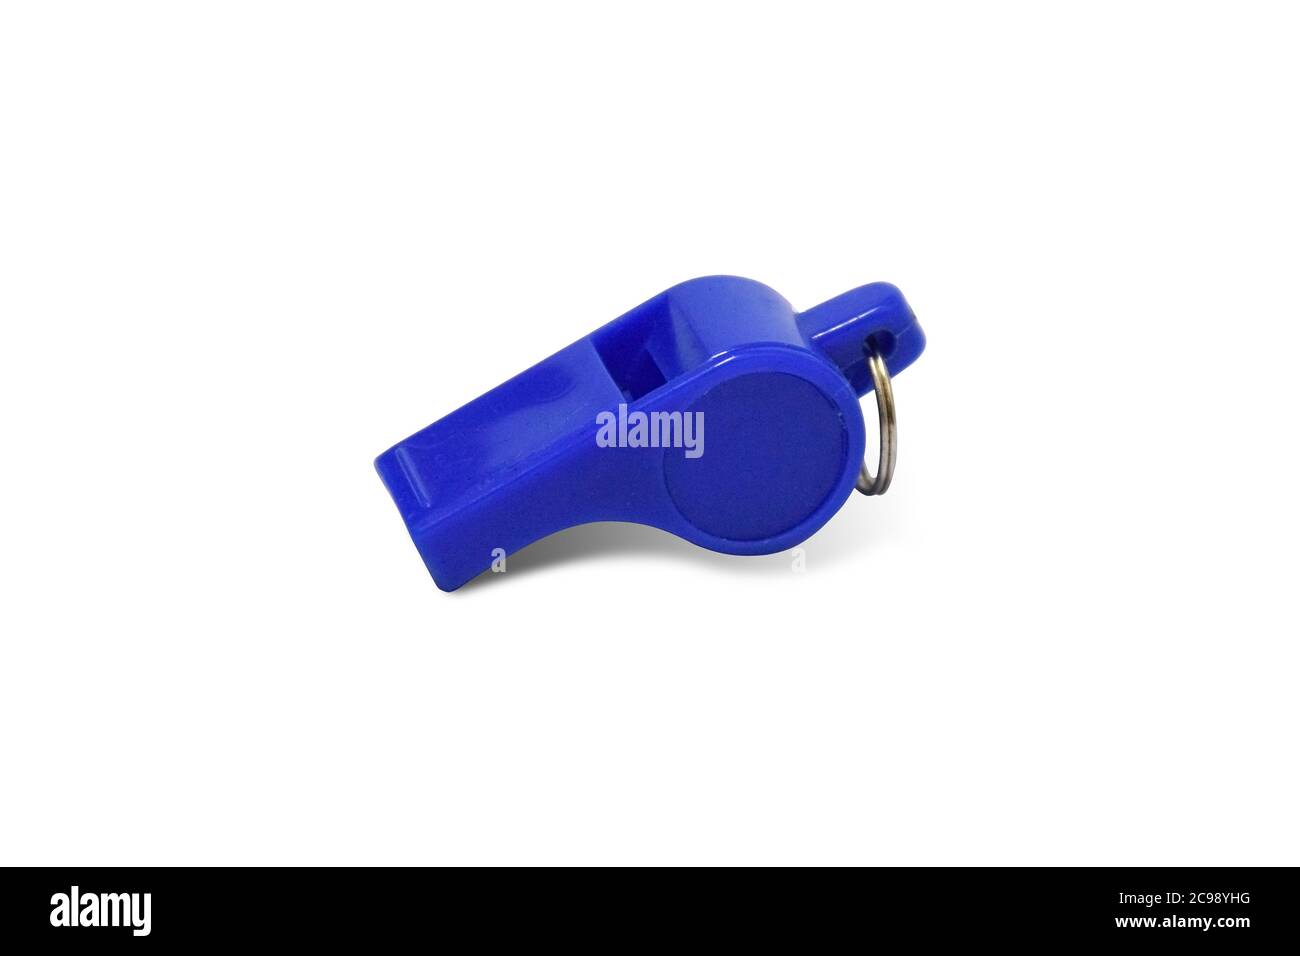 Blue whistle Isolated on white background with clipping path. Stock Photo